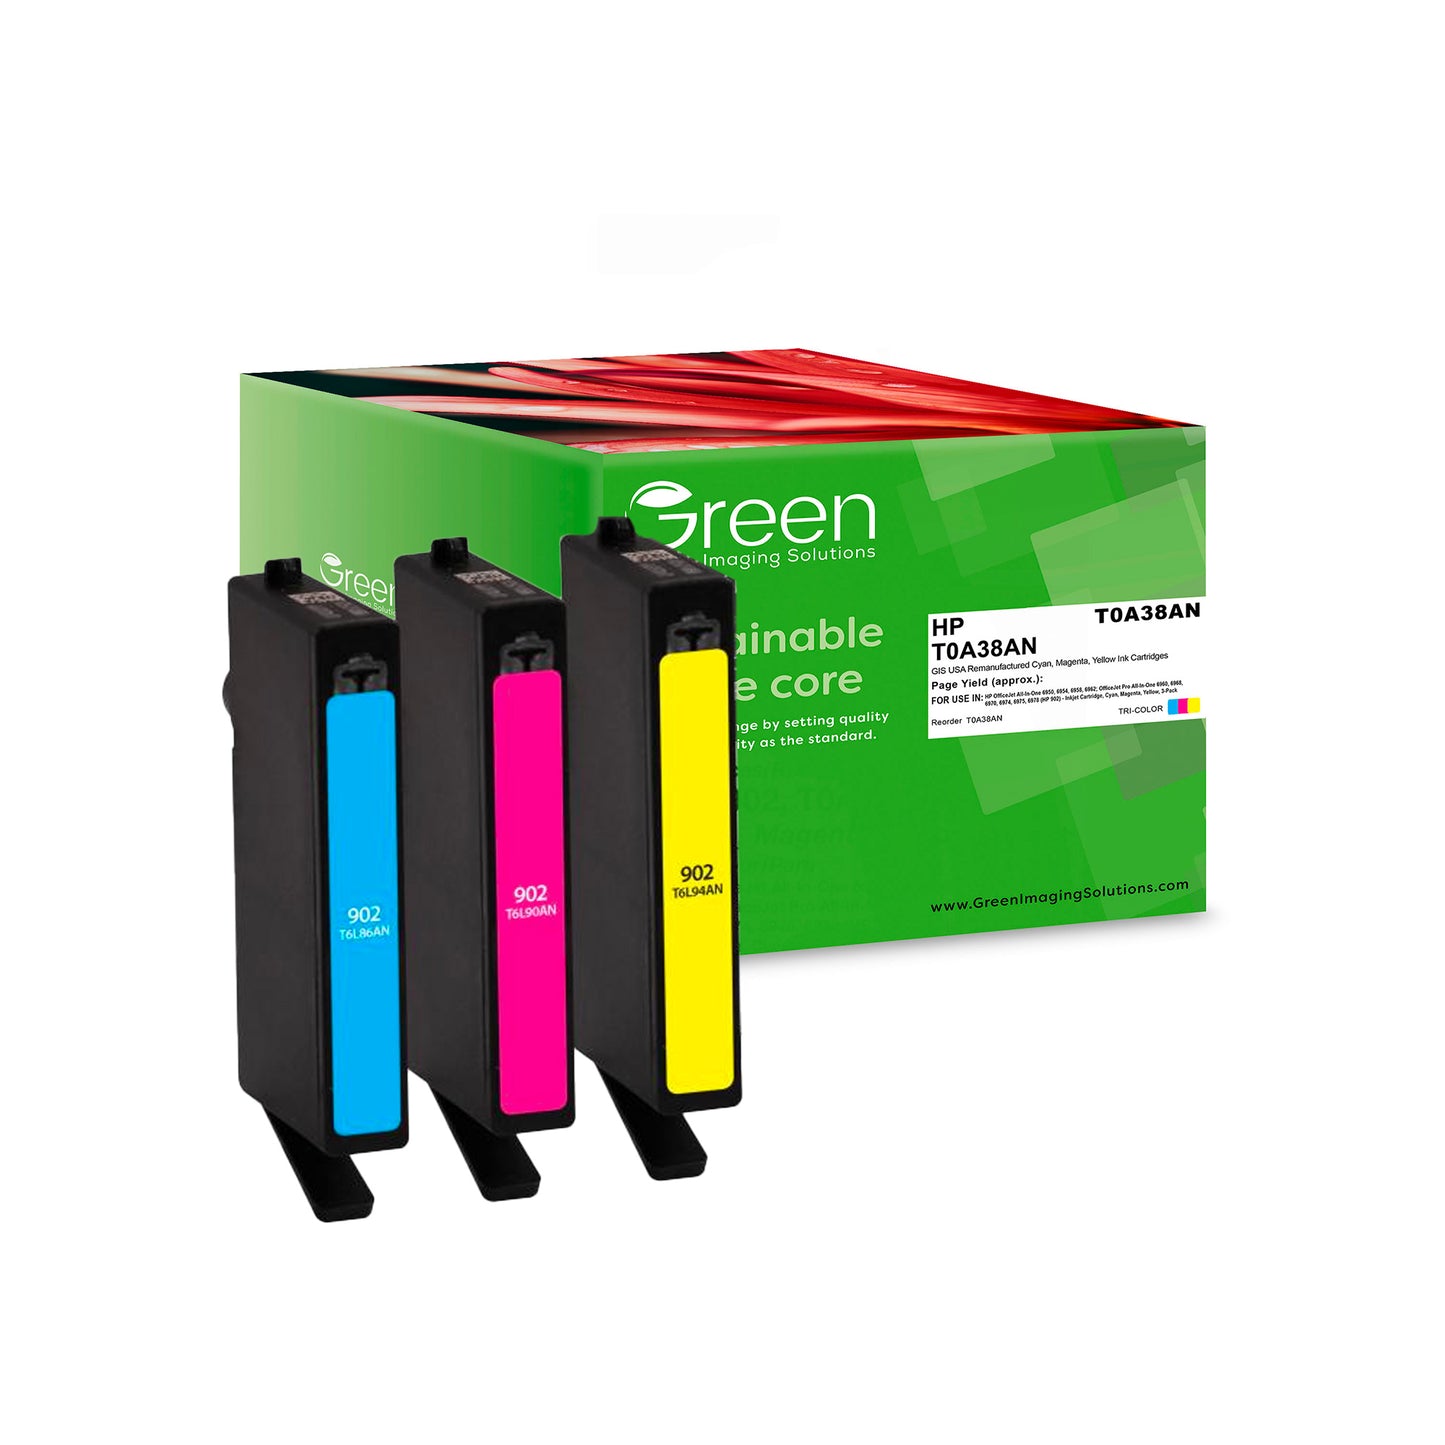 Green Imaging Solutions USA Remanufactured Cyan, Magenta, Yellow Ink Cartridges for HP 902 (T0A38AN) 3-Pack